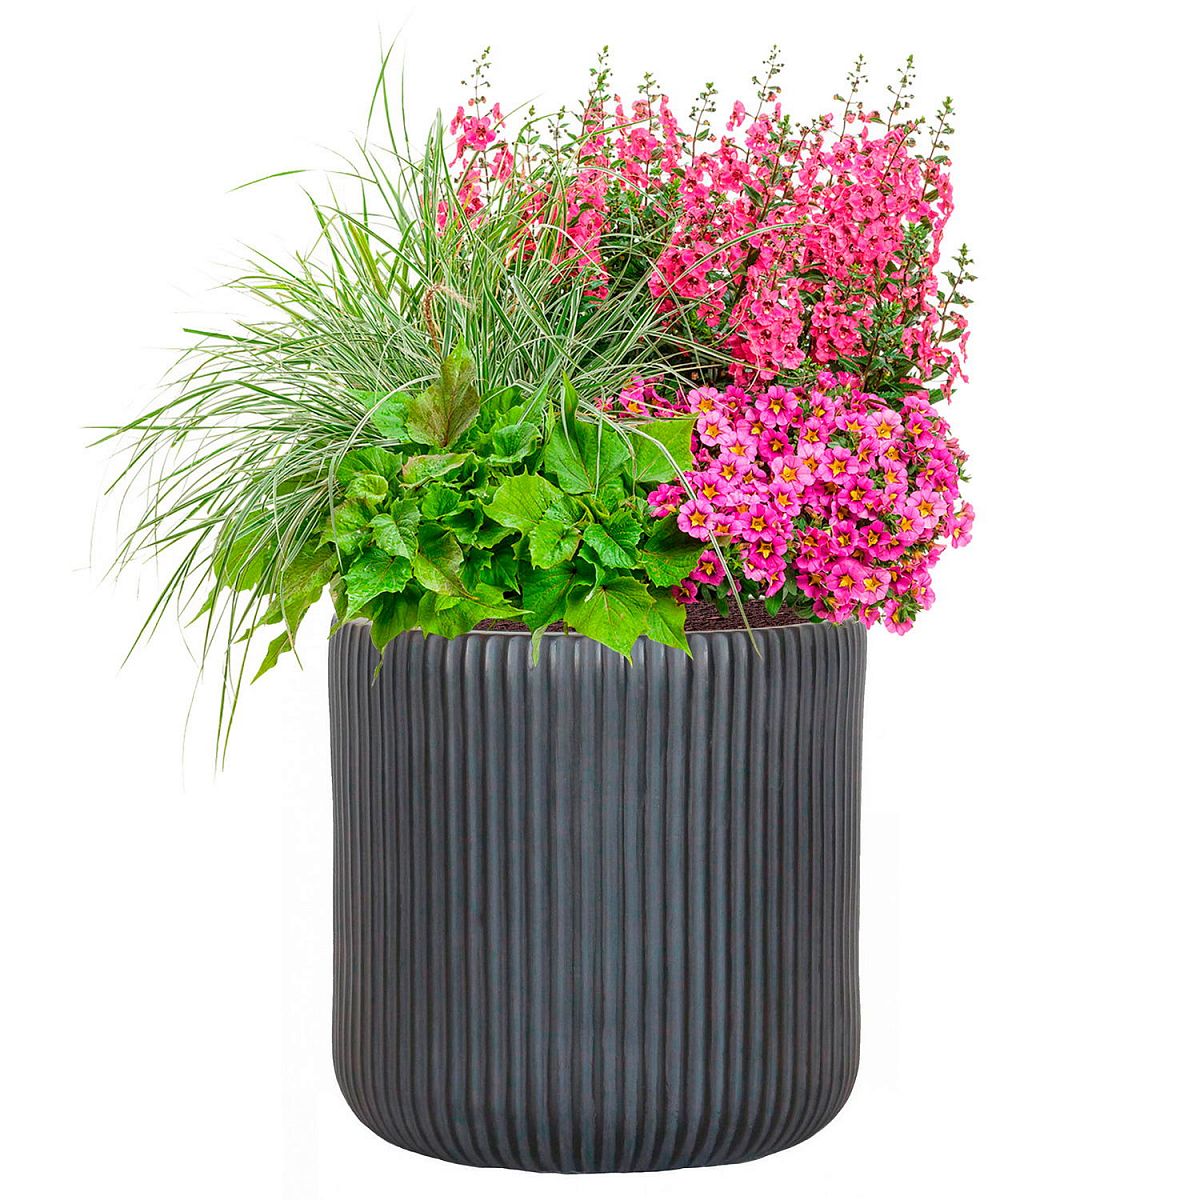 Ribbed Round Outdoor Planter by Idealist Lite